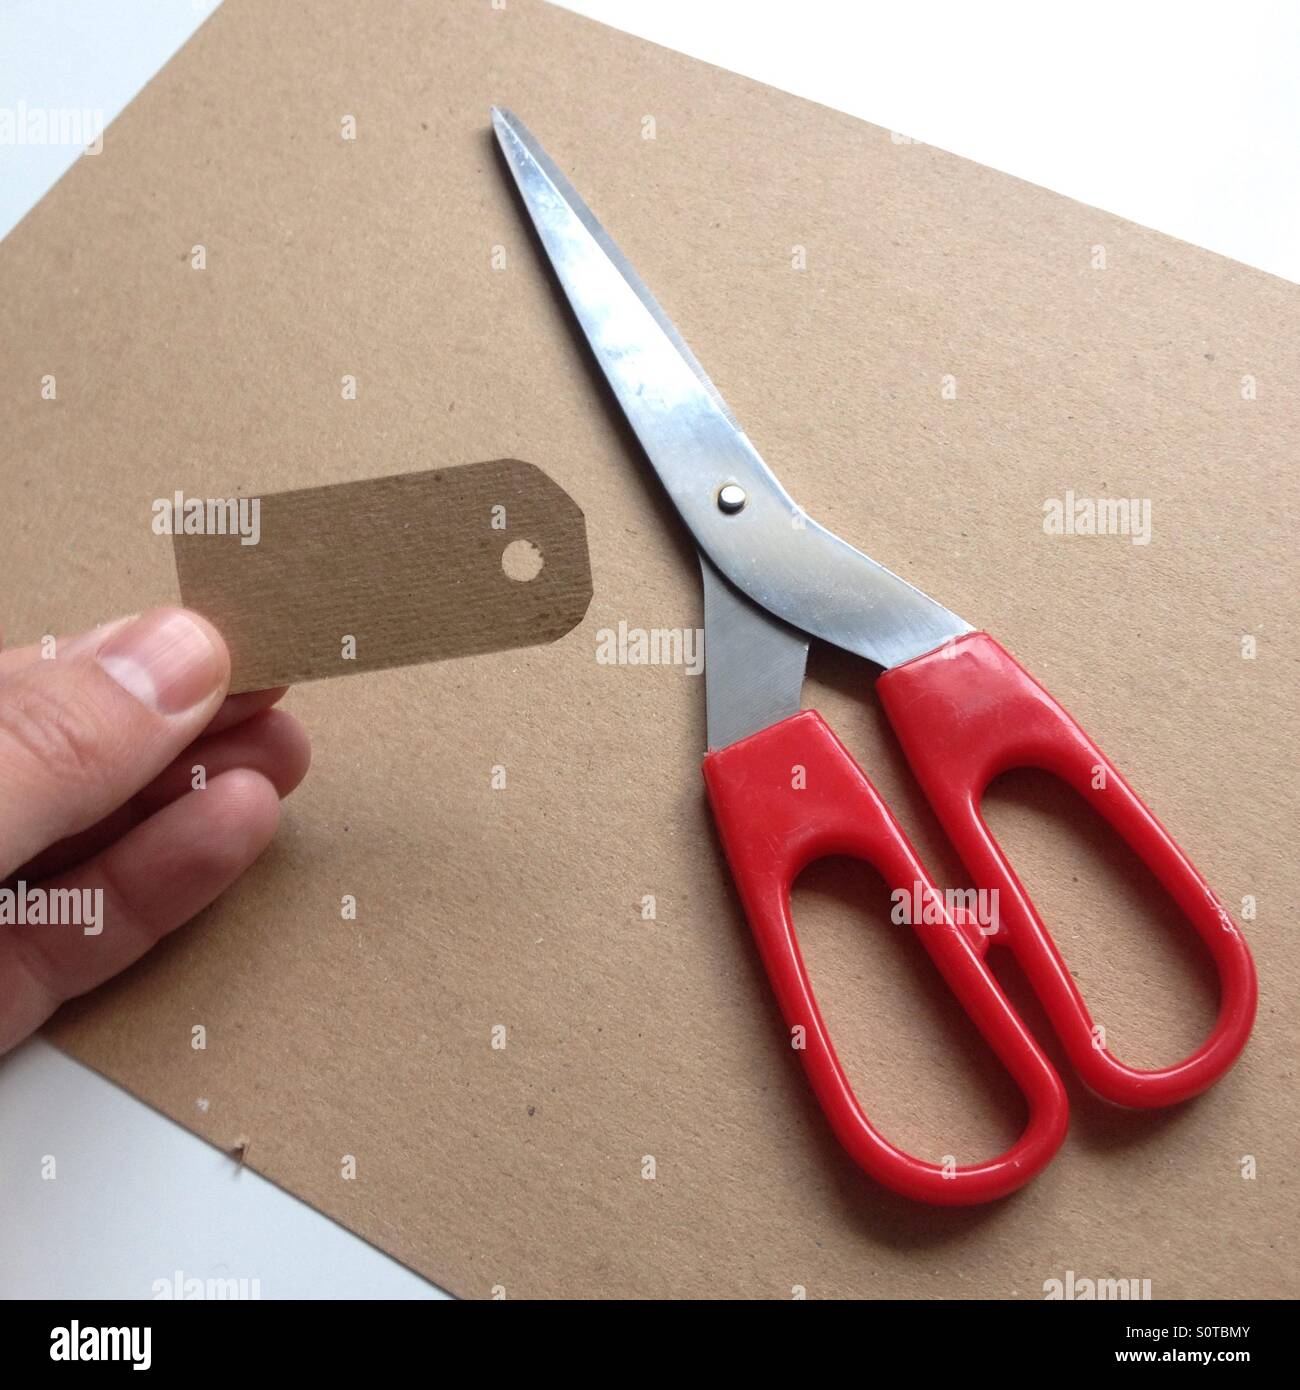 Cardboard scissors Cut Out Stock Images & Pictures - Alamy